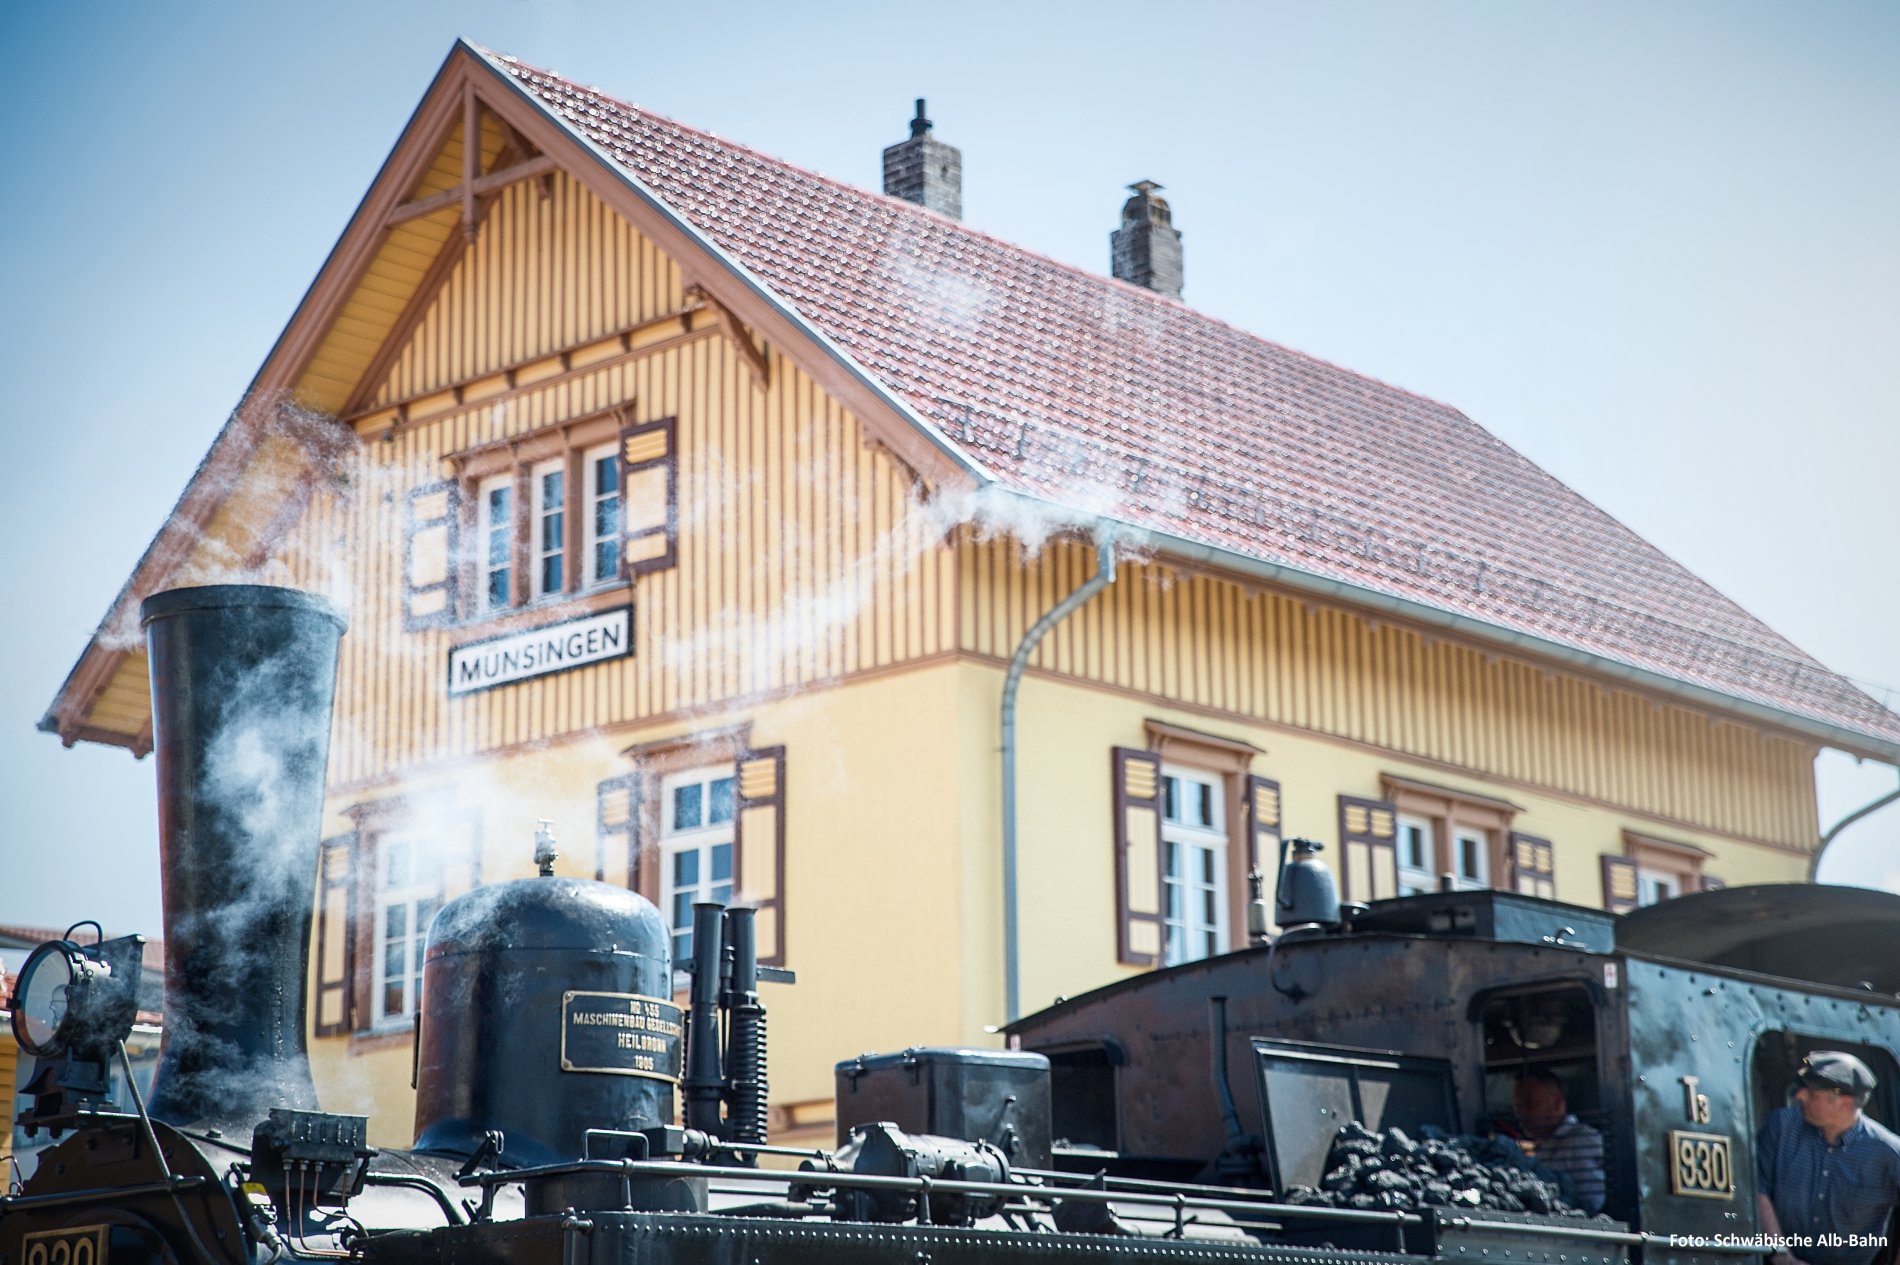 A steam locomotive stands in the foreground at Münsingen station. It is surrounded by steam clouds. In the background is the historic station building of Münsingen.